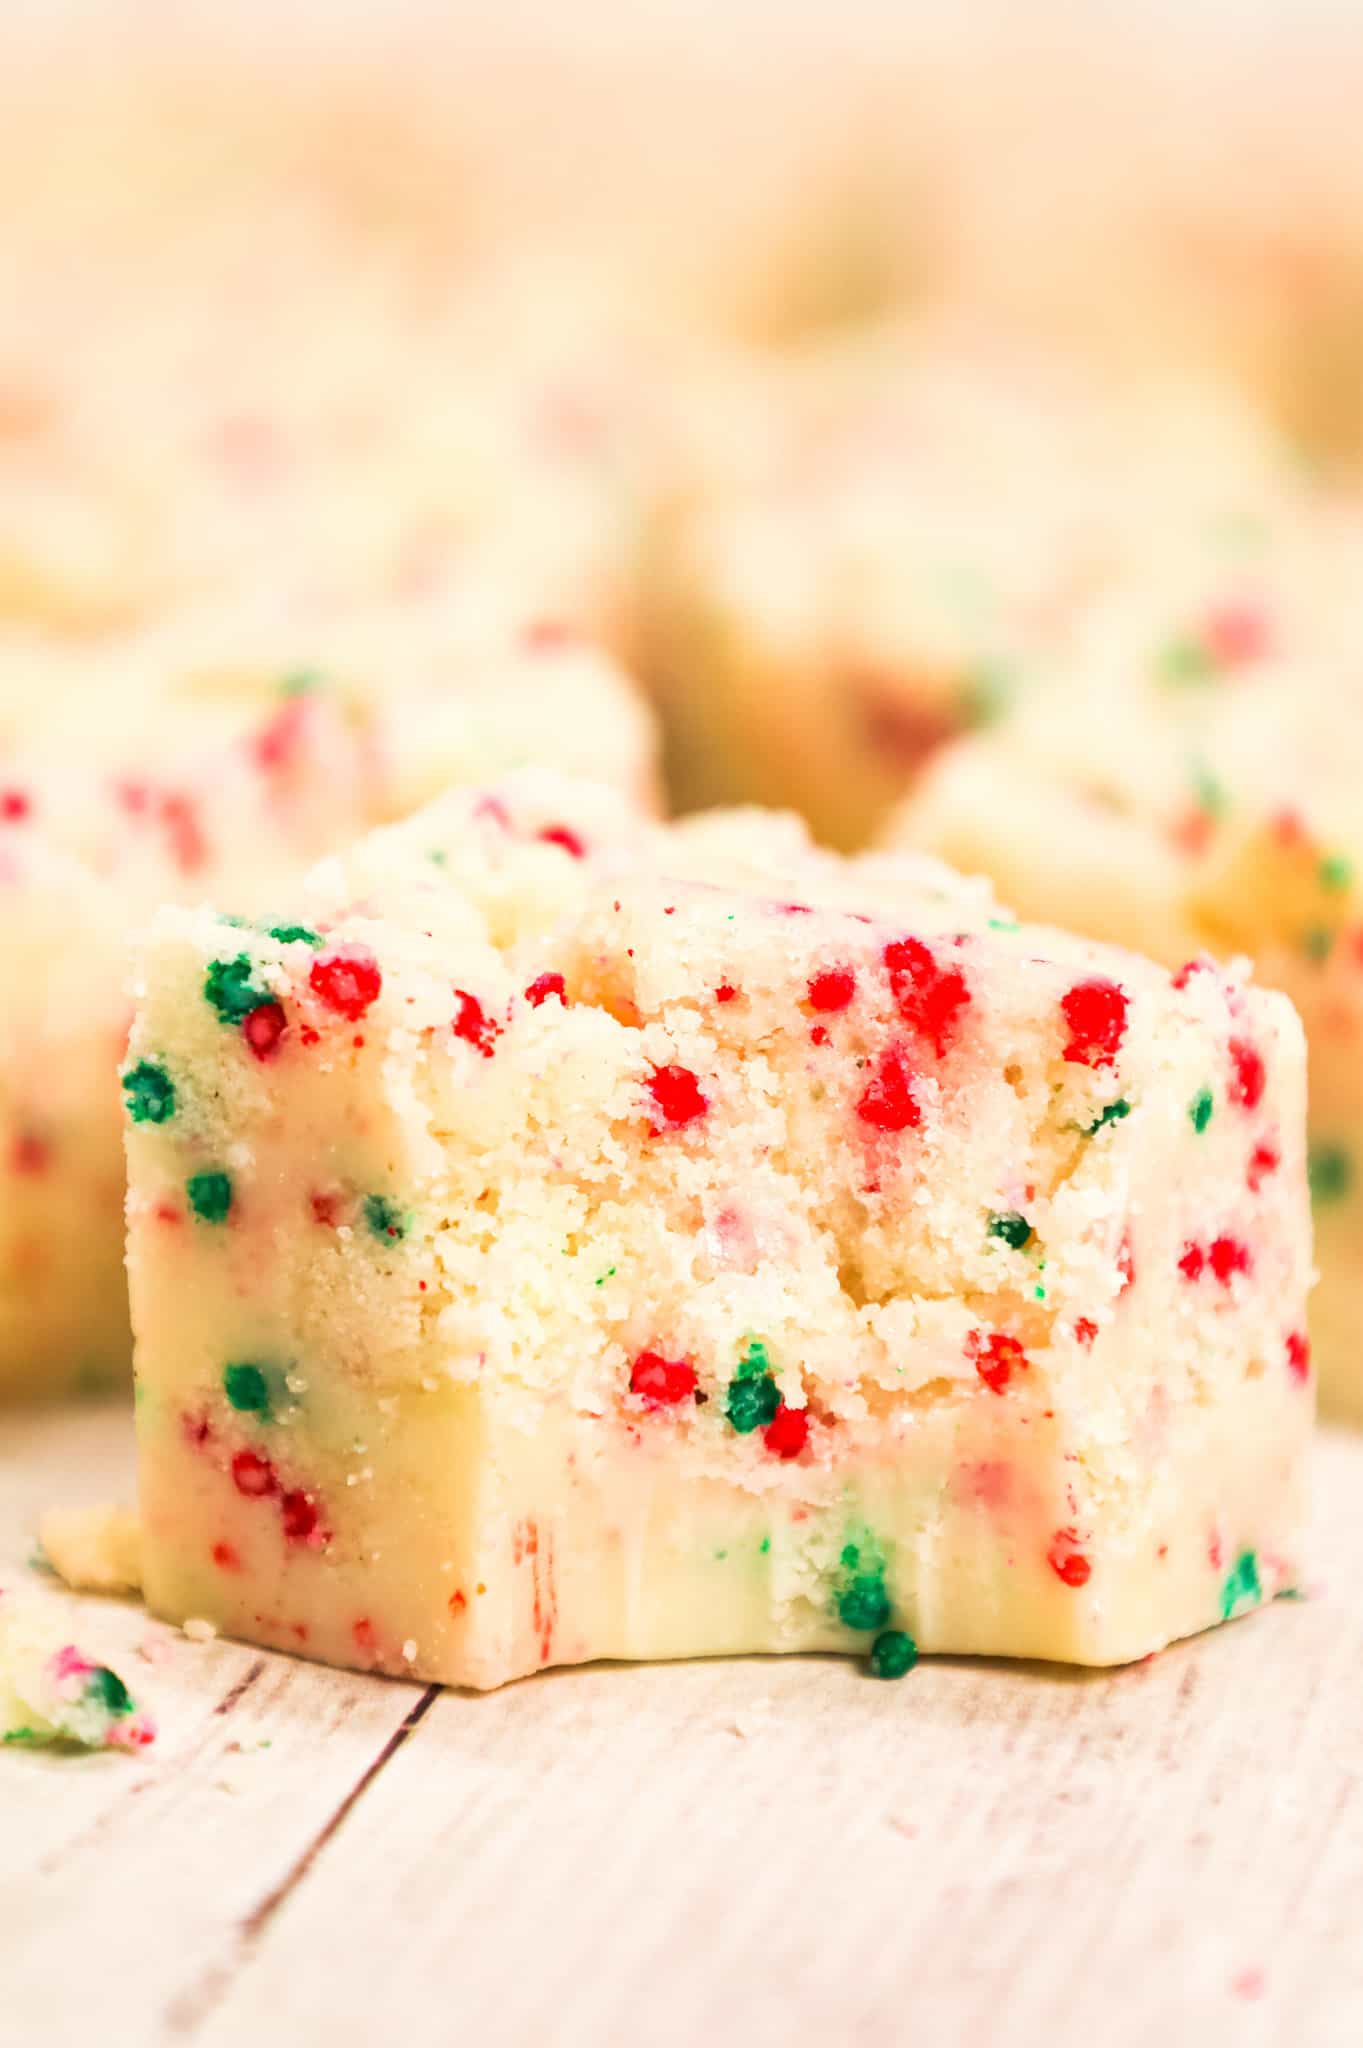 Christmas Sugar Cookie Fudge is a delicious holiday treat loaded with baked sugar cookie crumble, sprinkles, sweetened condensed milk and white chocolate chips.